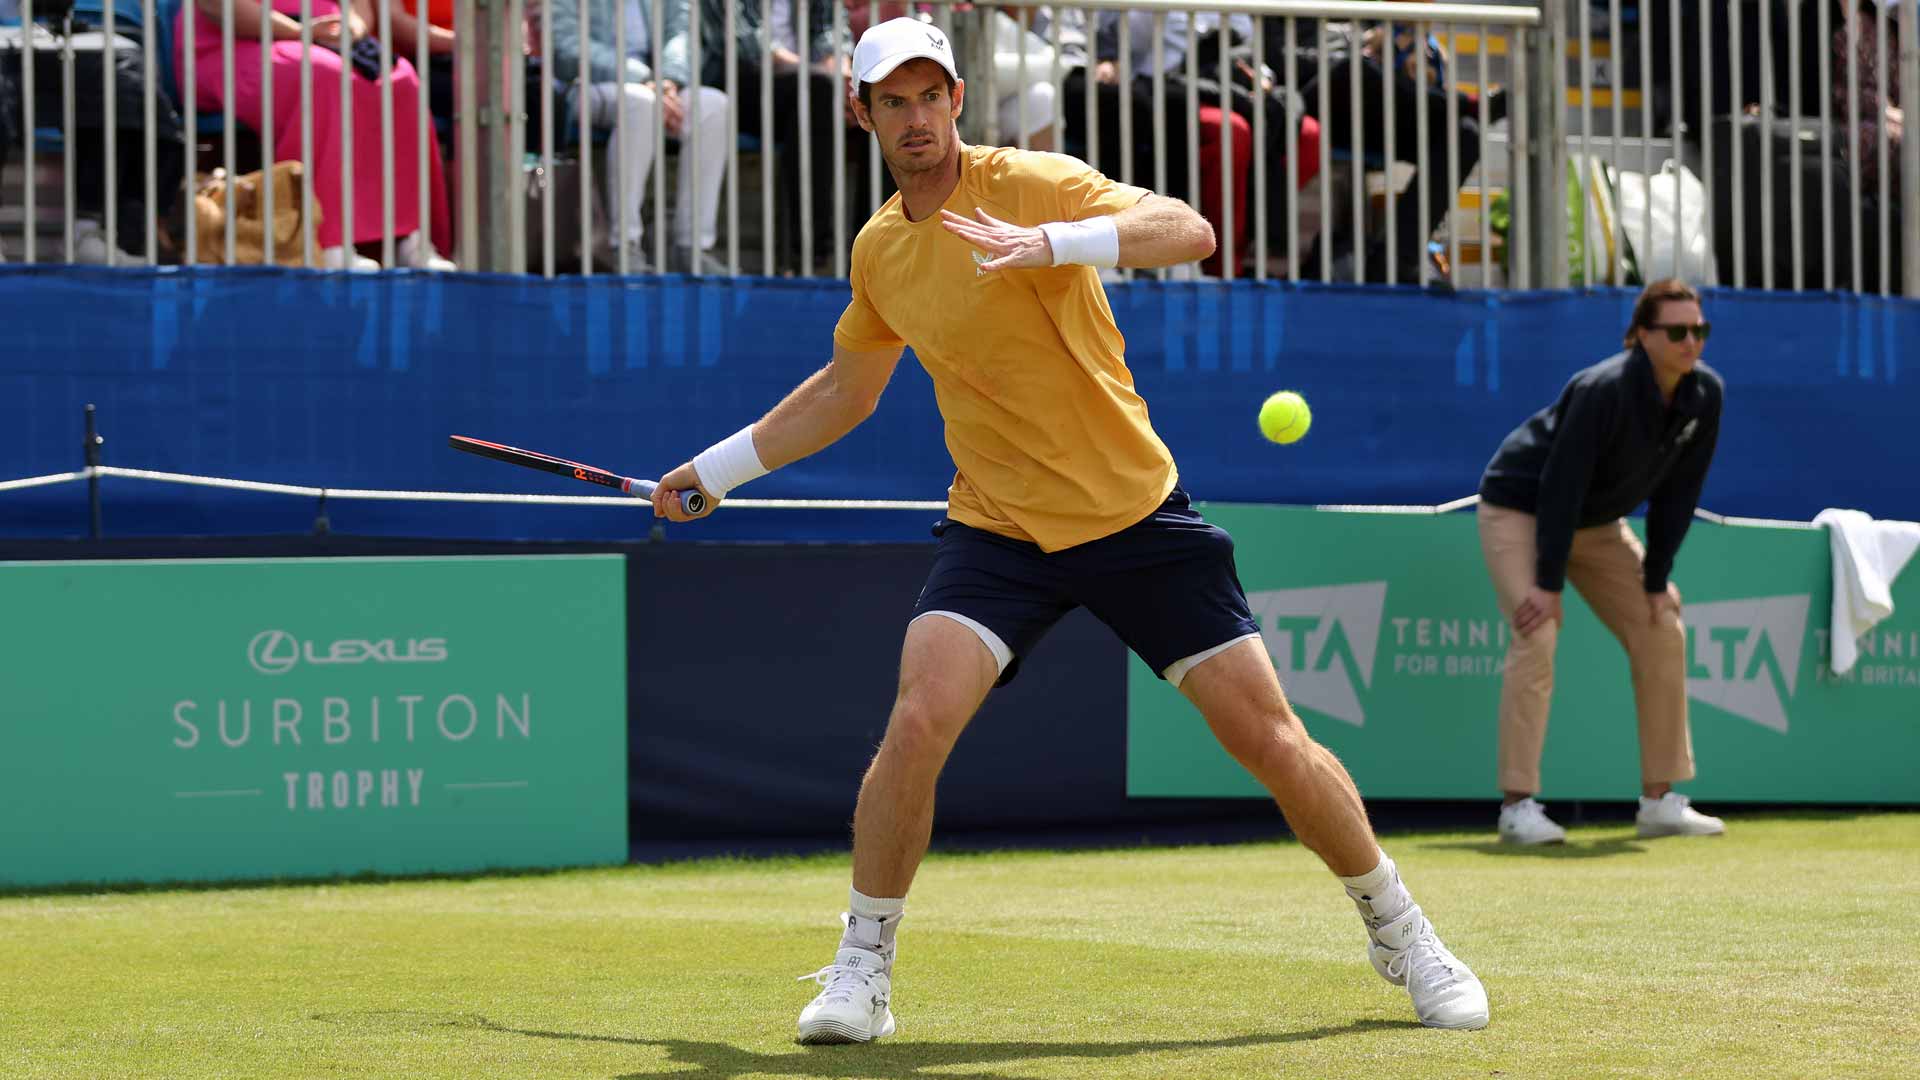 Andy Murray in action at the Lexus Surbiton Trophy.